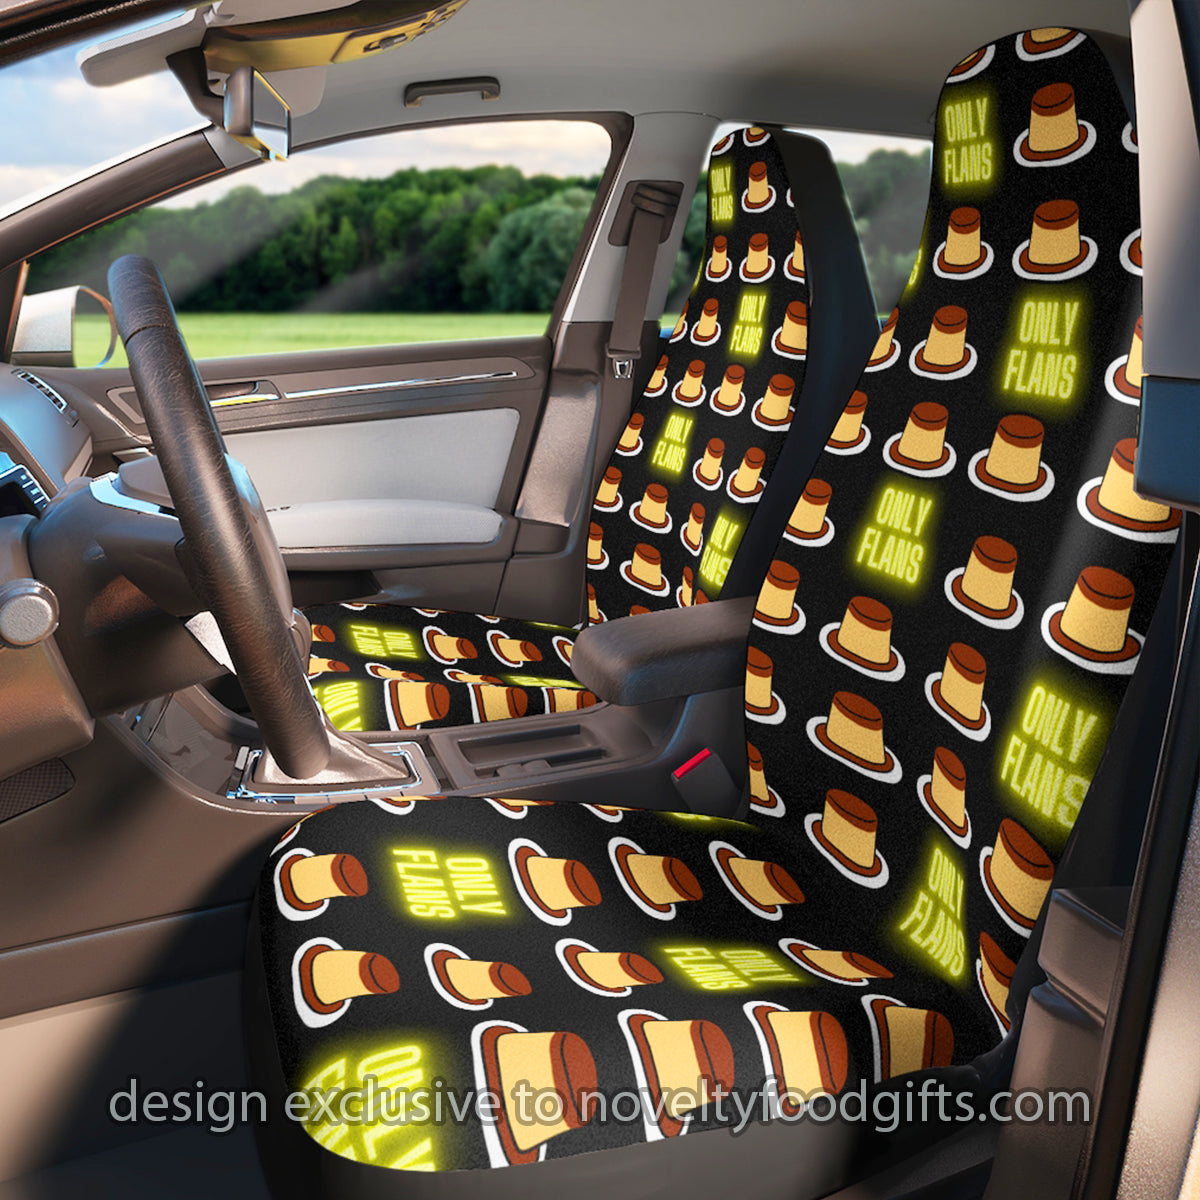 Only Flans (Fans) Funny Food Pun Car Seat Covers – noveltyfoodgifts